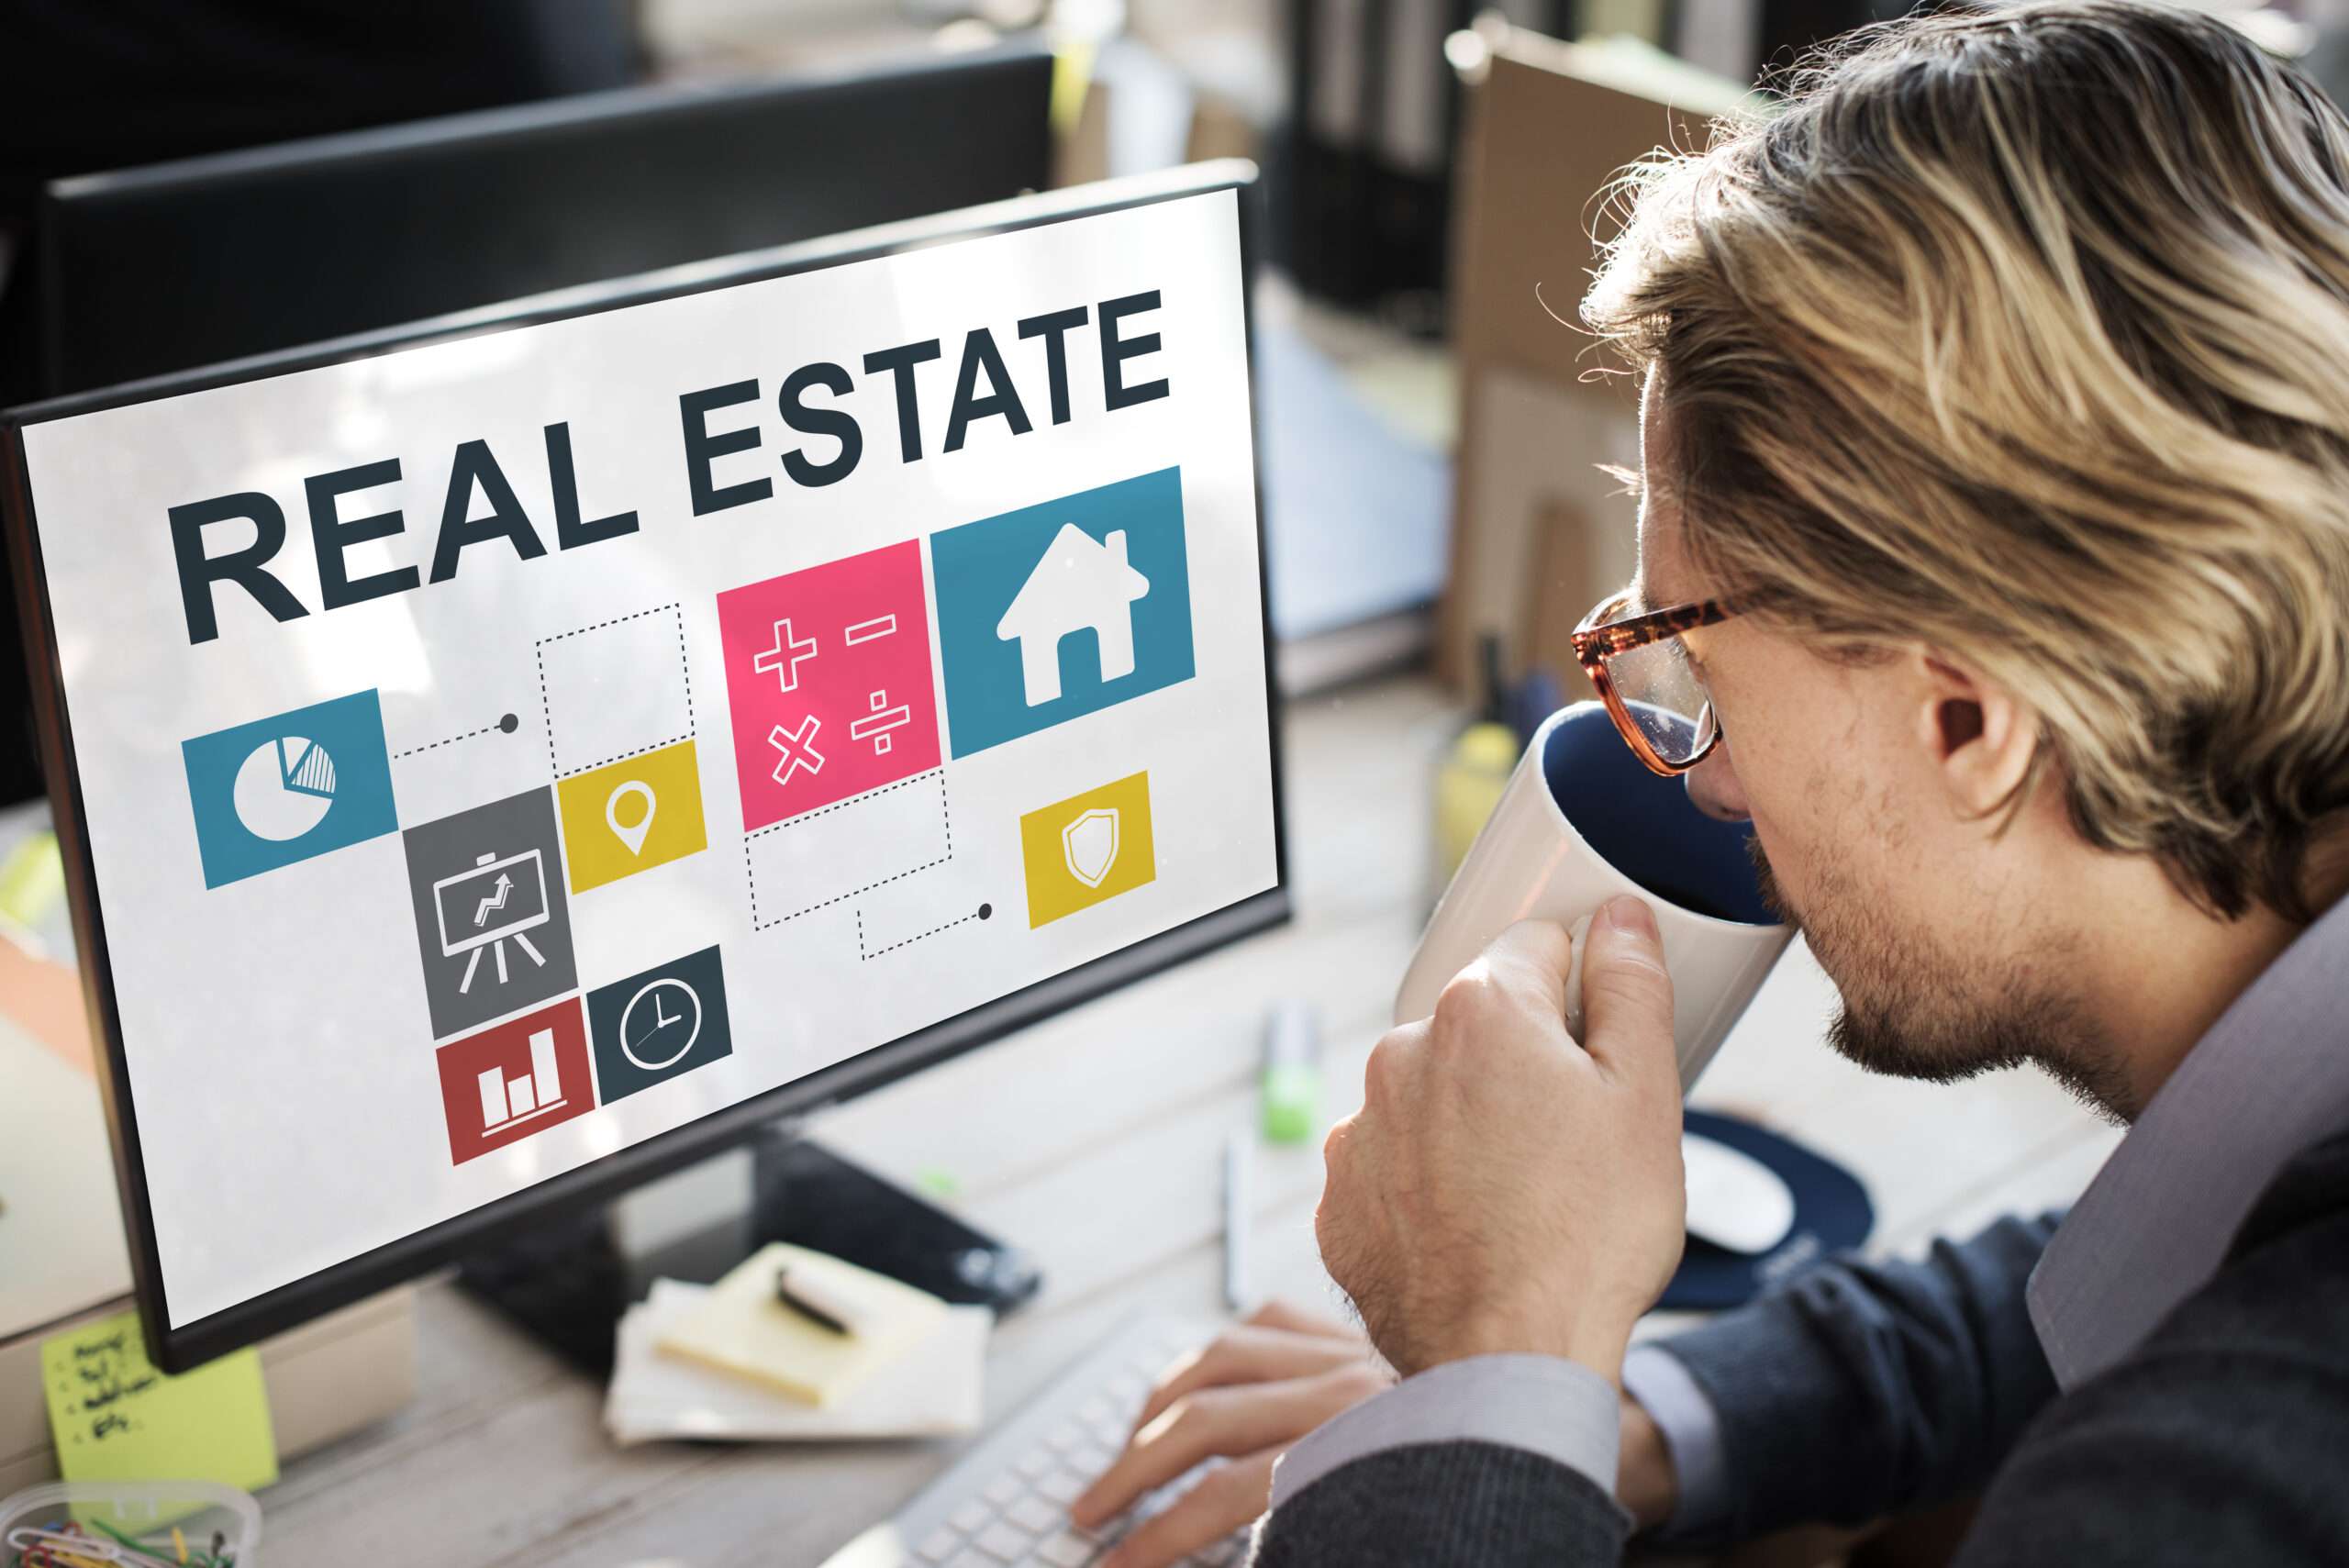 How a Real Estate CRM Works